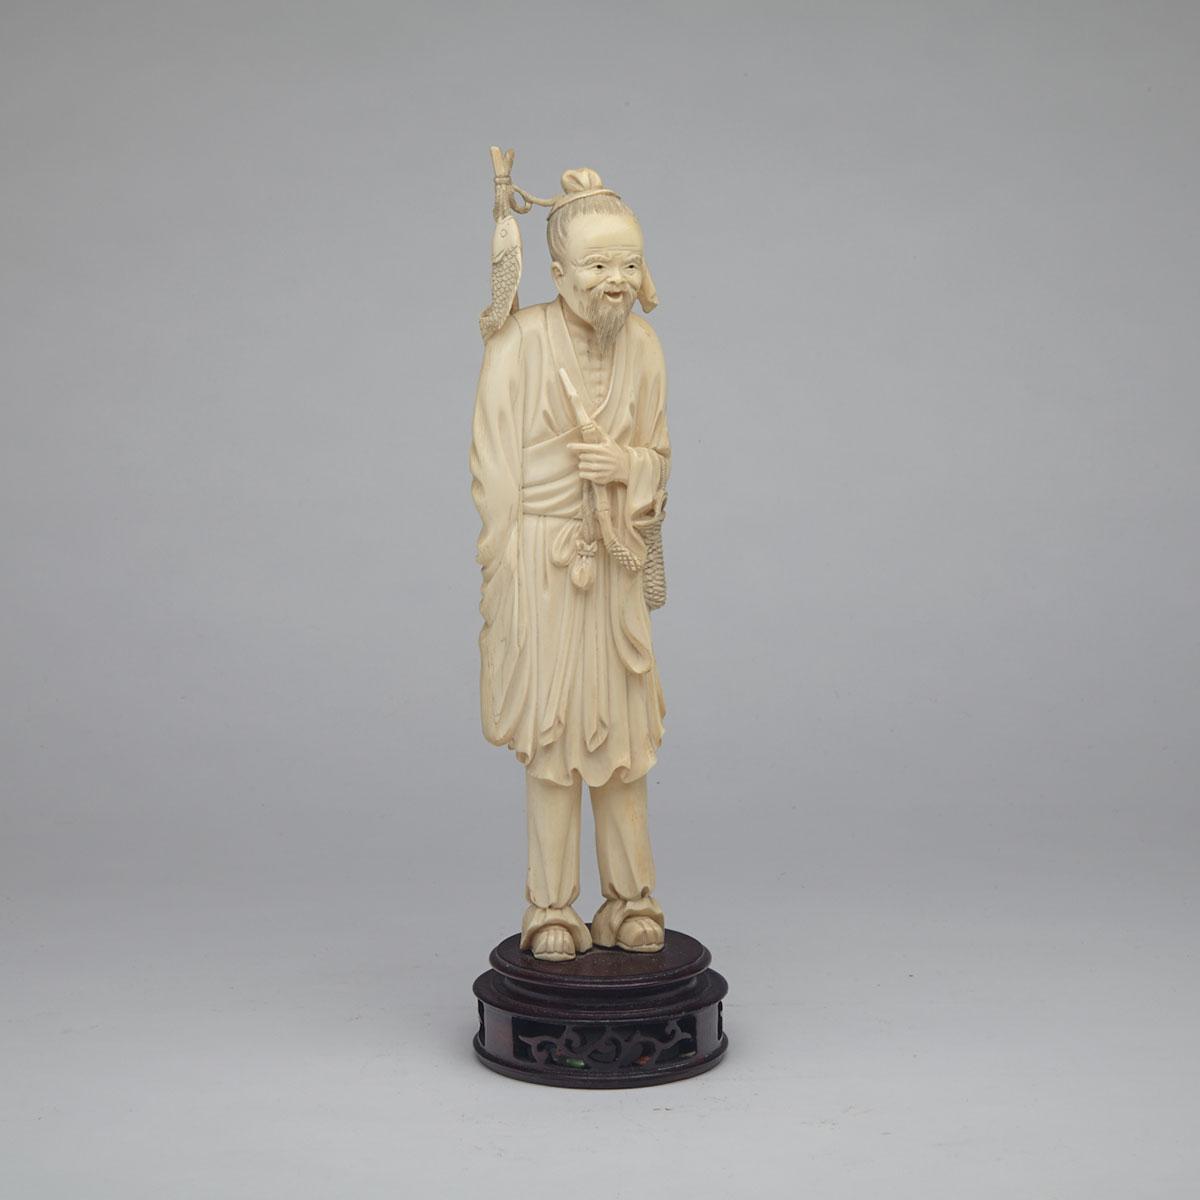 Ivory Carved Figure of a Fisherman, Circa 1940’s